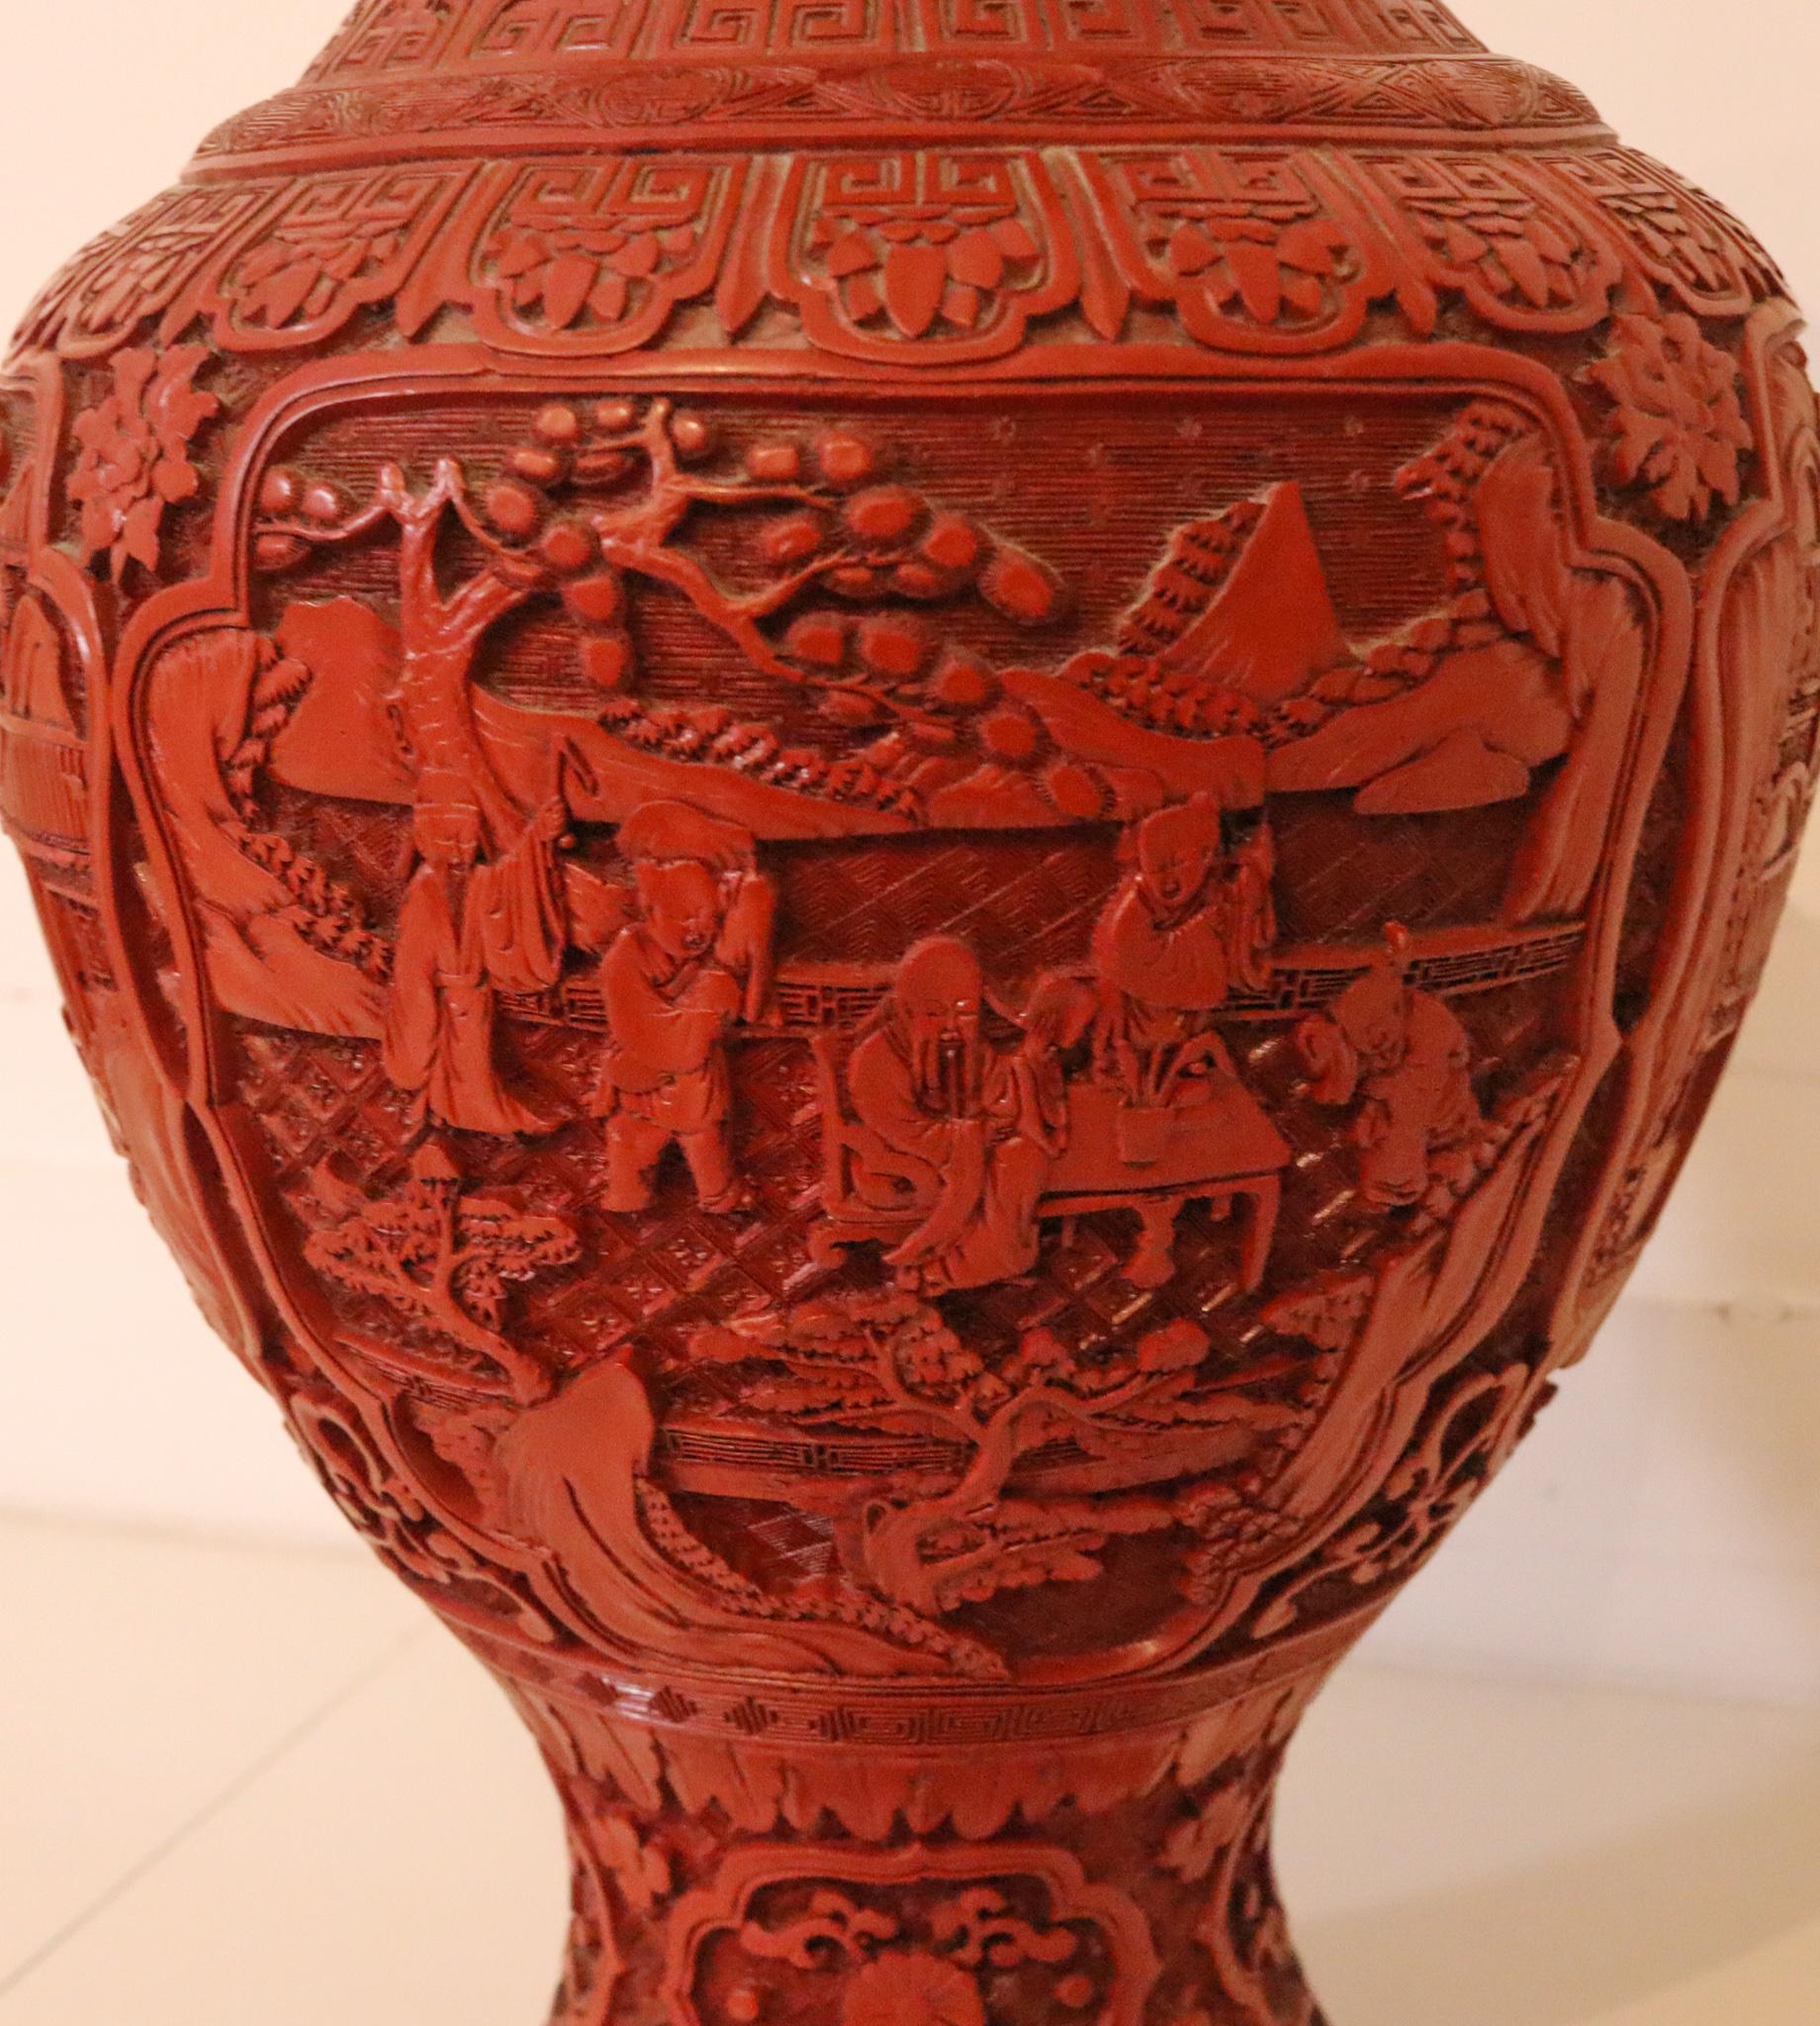 Large Chinese Carved Cinnabar Vase with brass lining.

Very nice antique Chinese export vase, created during the Victorian era (1838-1901), back in the 1900. It is finely carved with a bombe baluster shape in vivid red cinnabar and depicts five